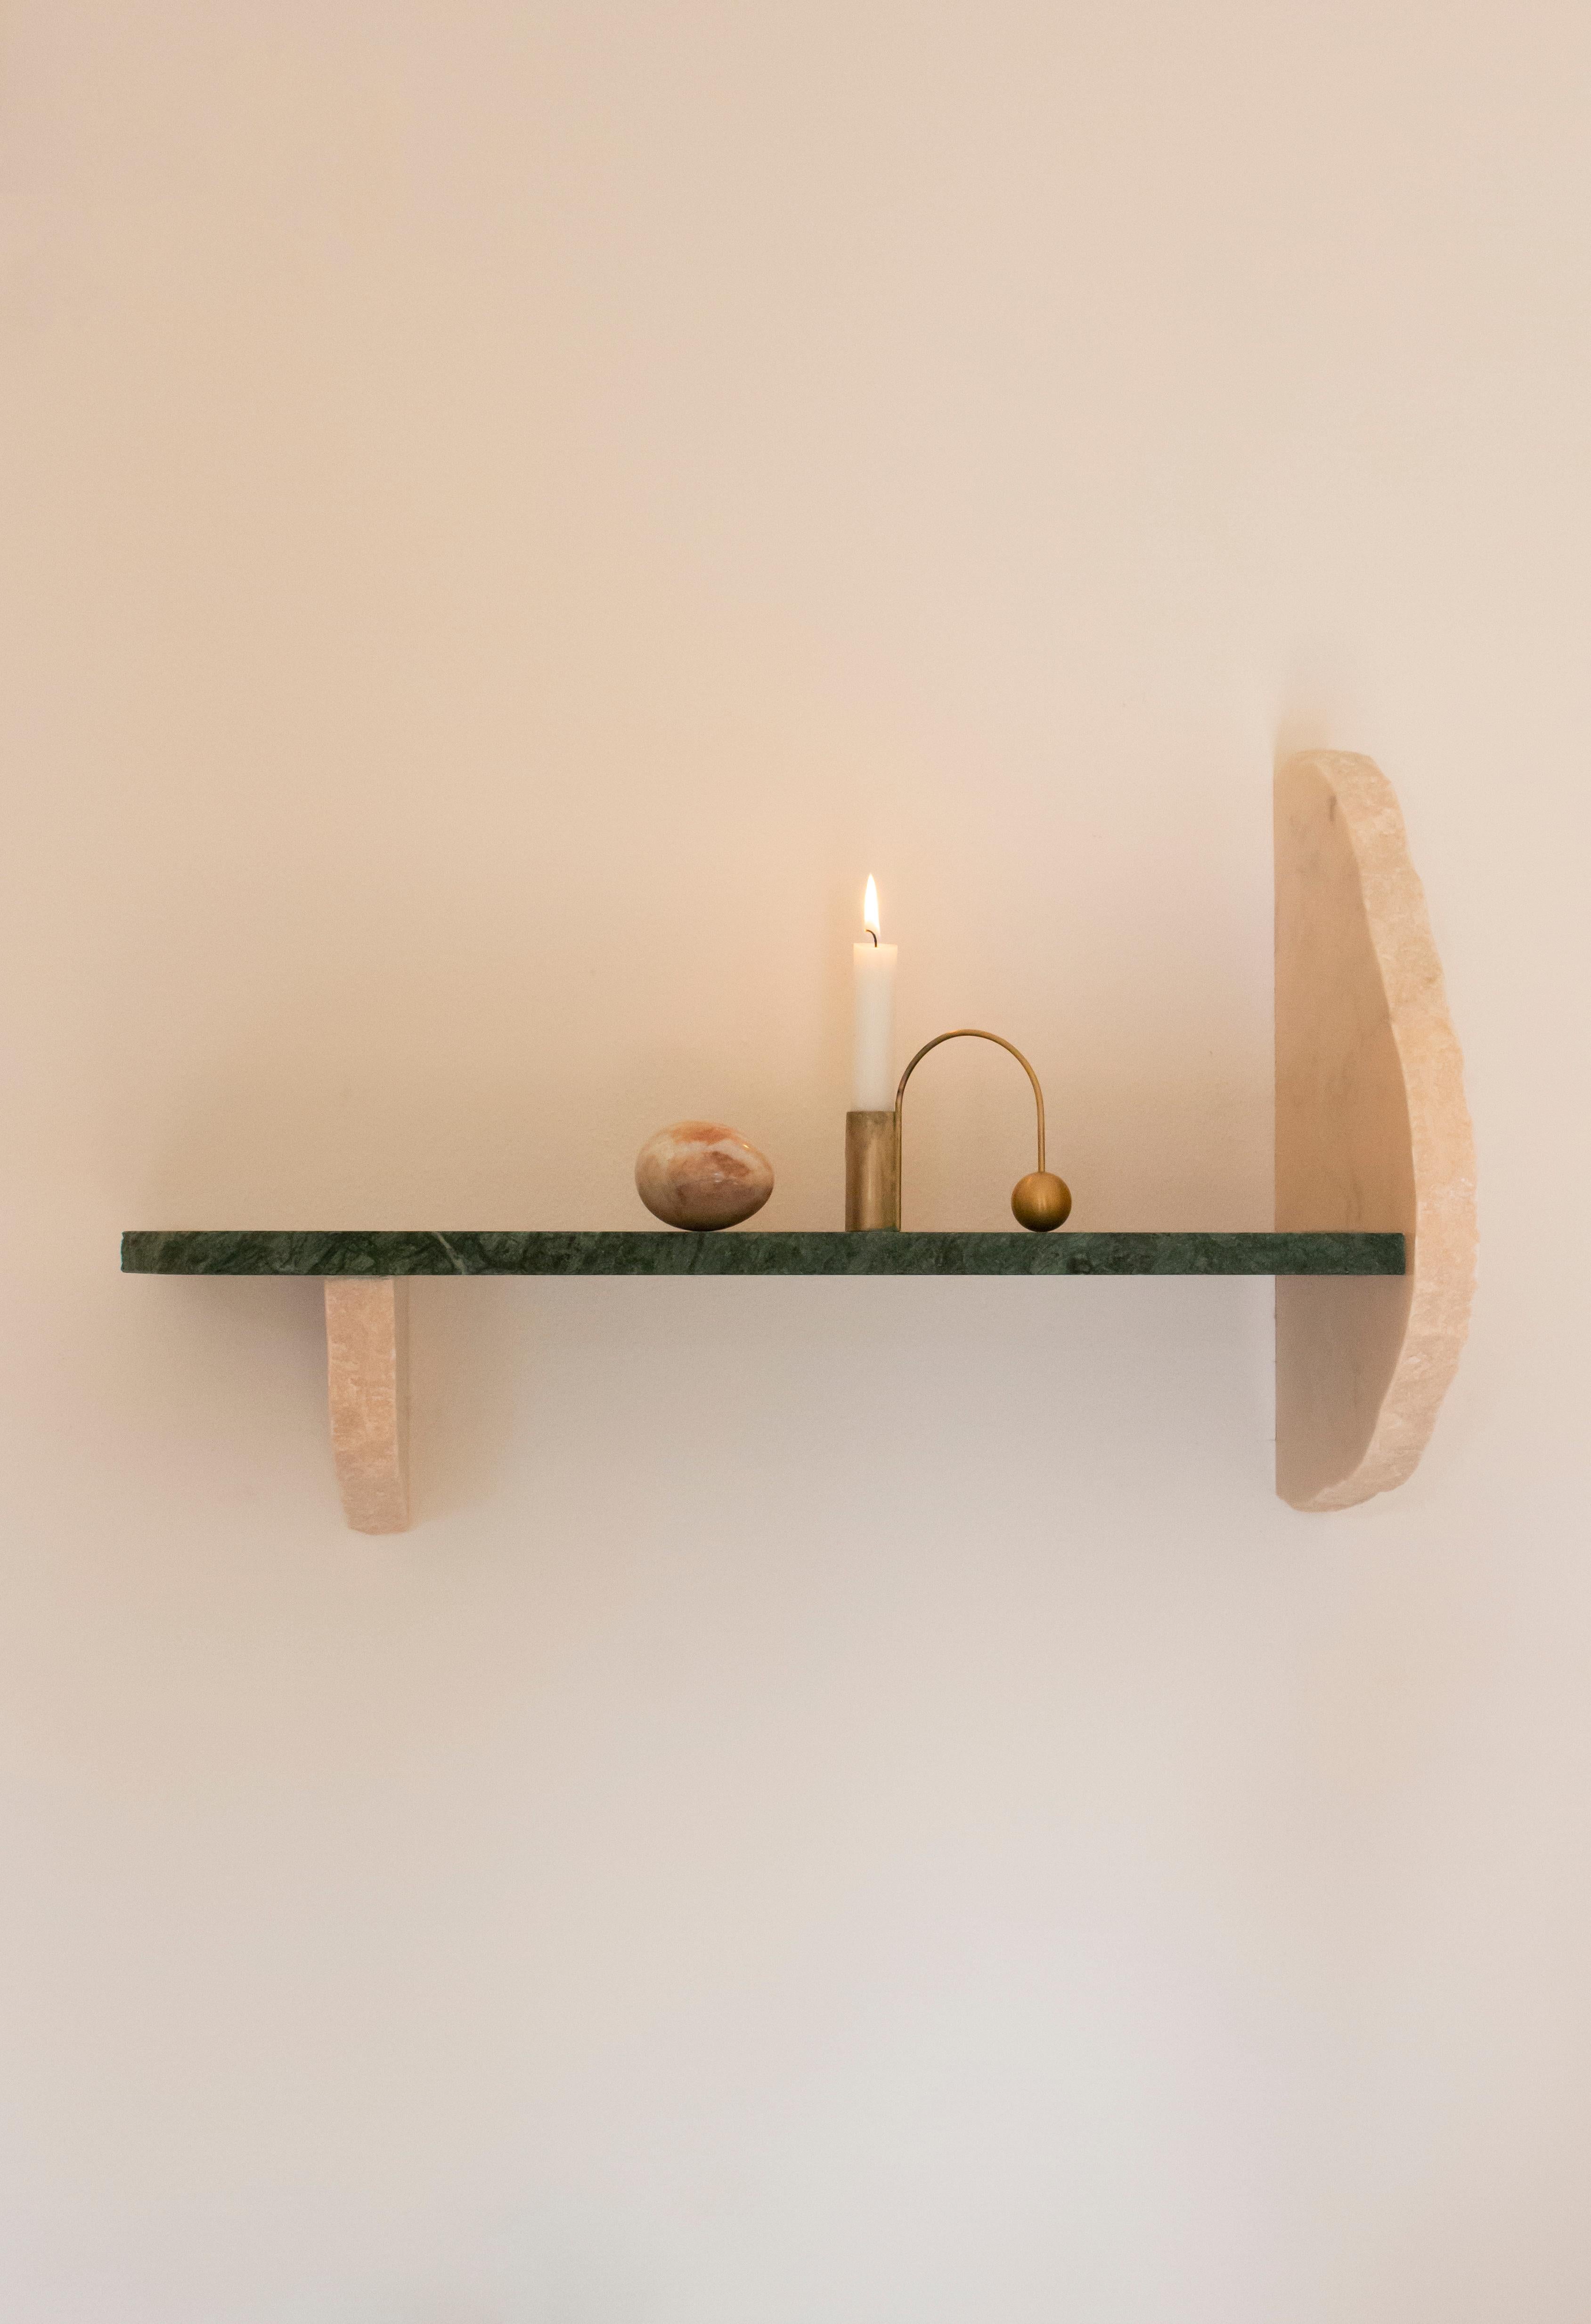 This one-of-a-kind design shelf is completely handmade in savaging marble elements from the production cycle. Duo Shelf is a product of sustainable design promoting circular economy being produced from savaged materials. Every piece is unique and